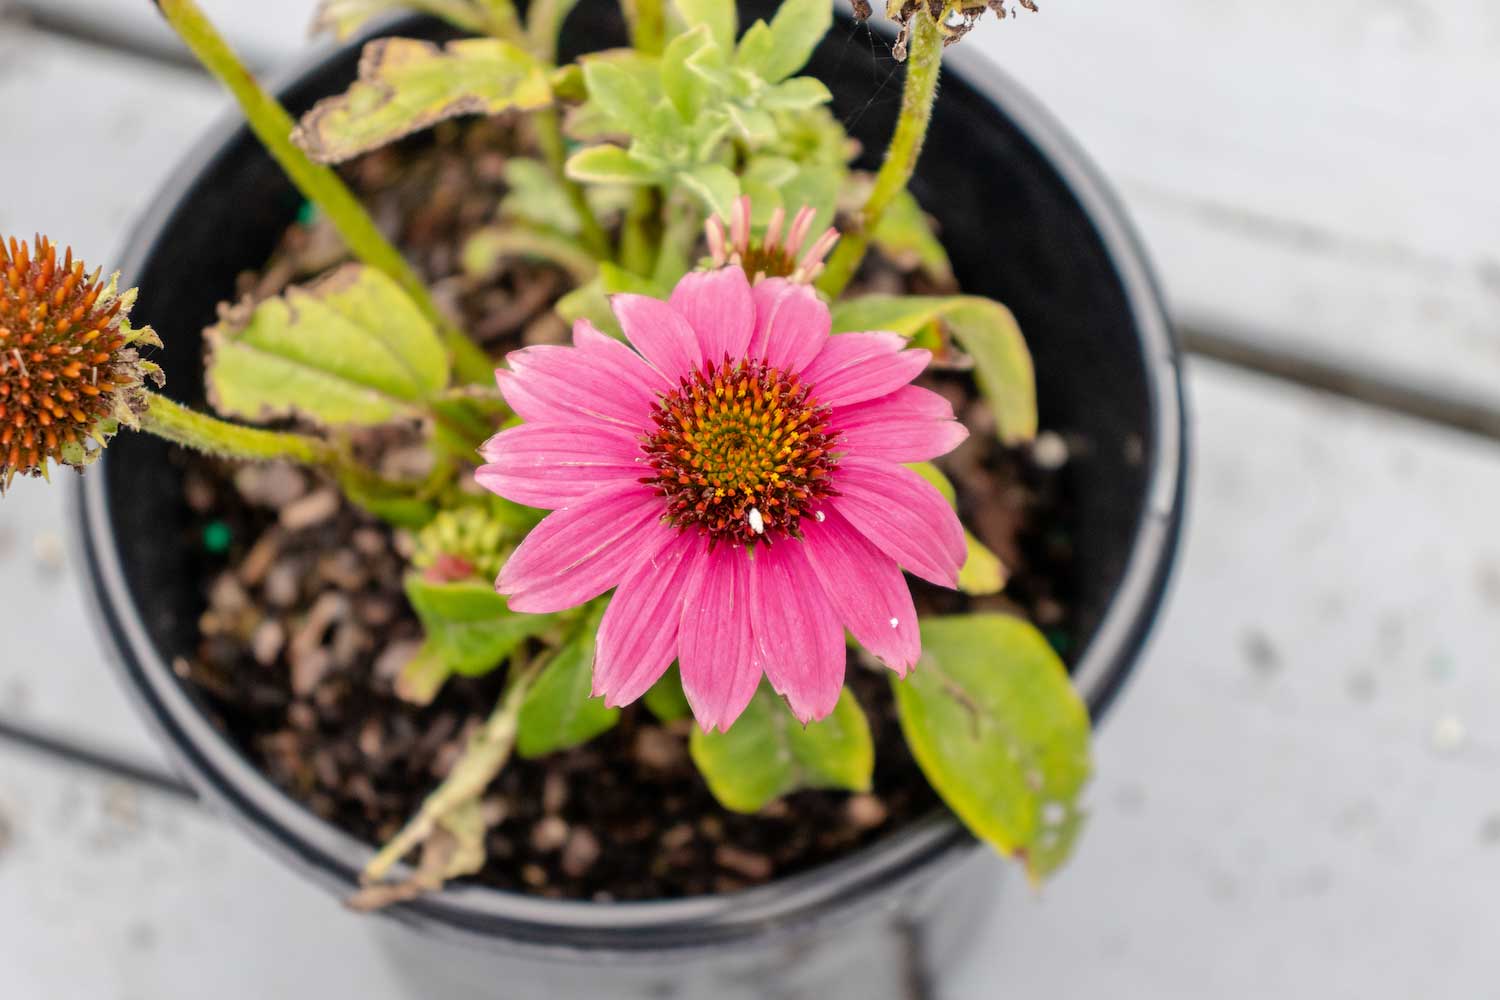 A purple coneflower growing in a container.